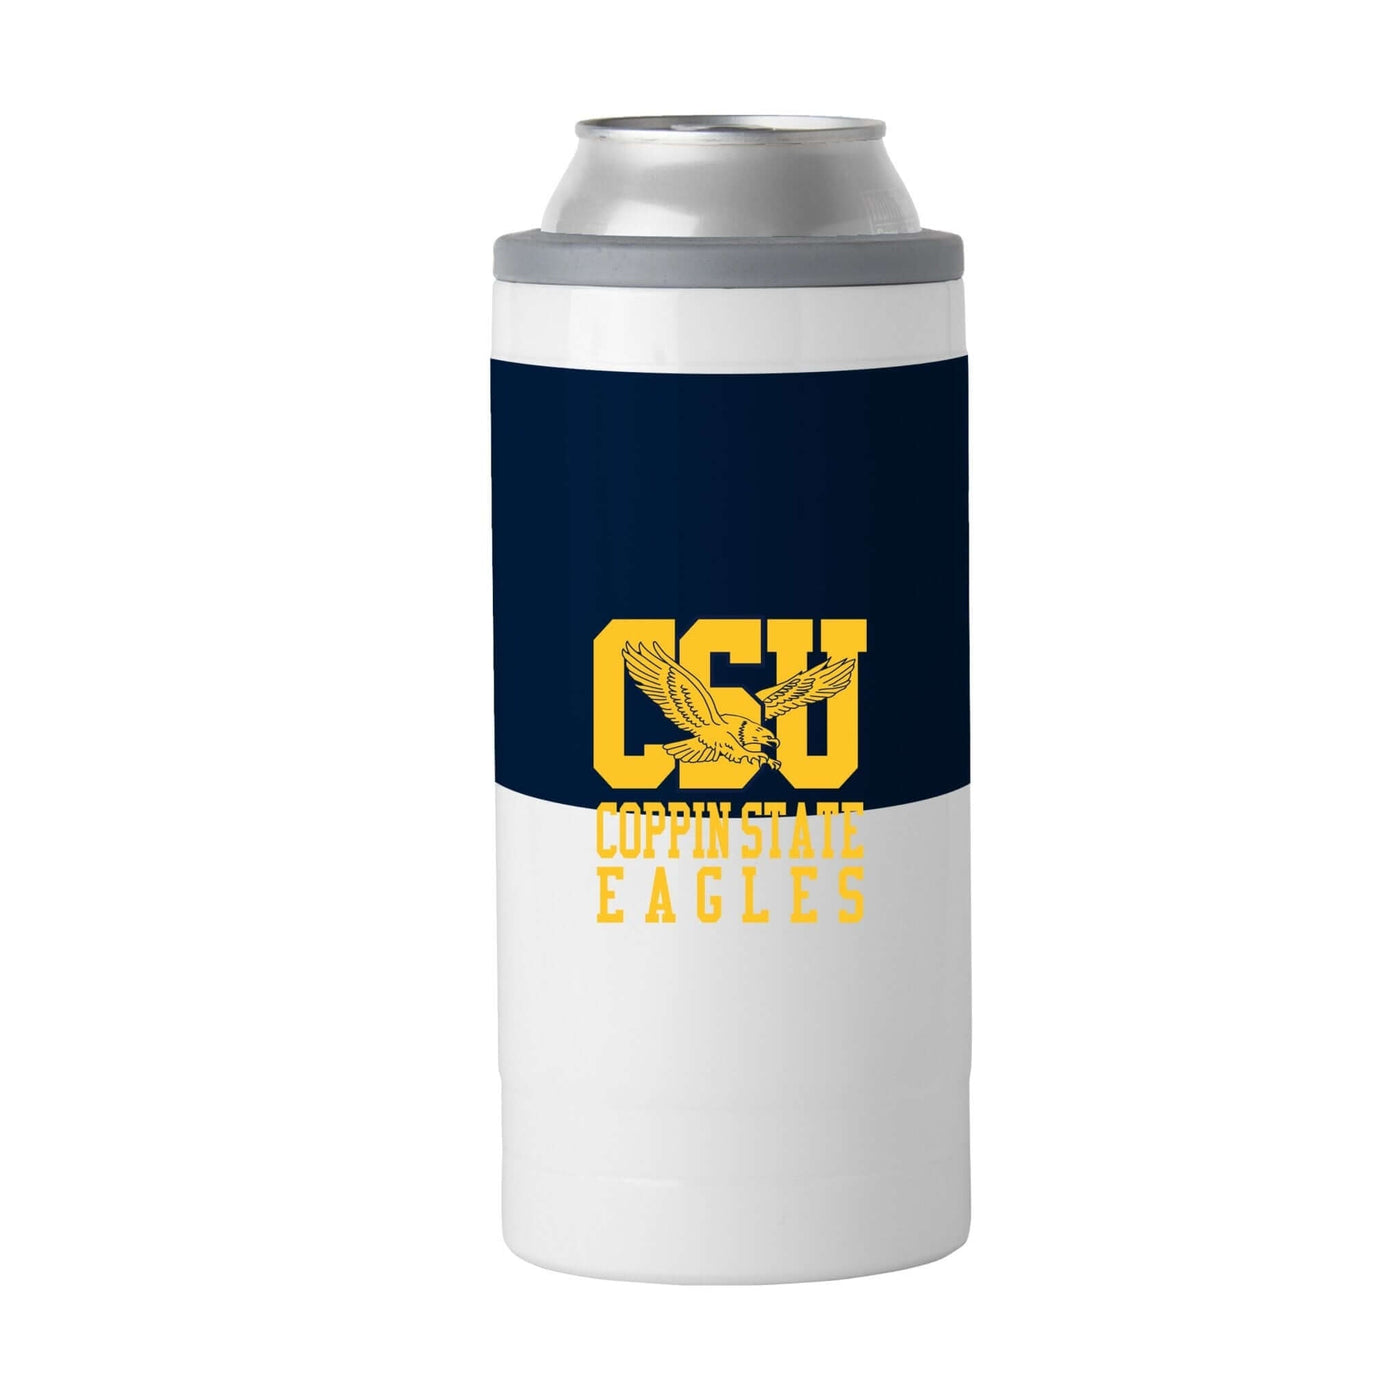 Coppin State 12oz Colorblock Slim Can Coolie - Logo Brands